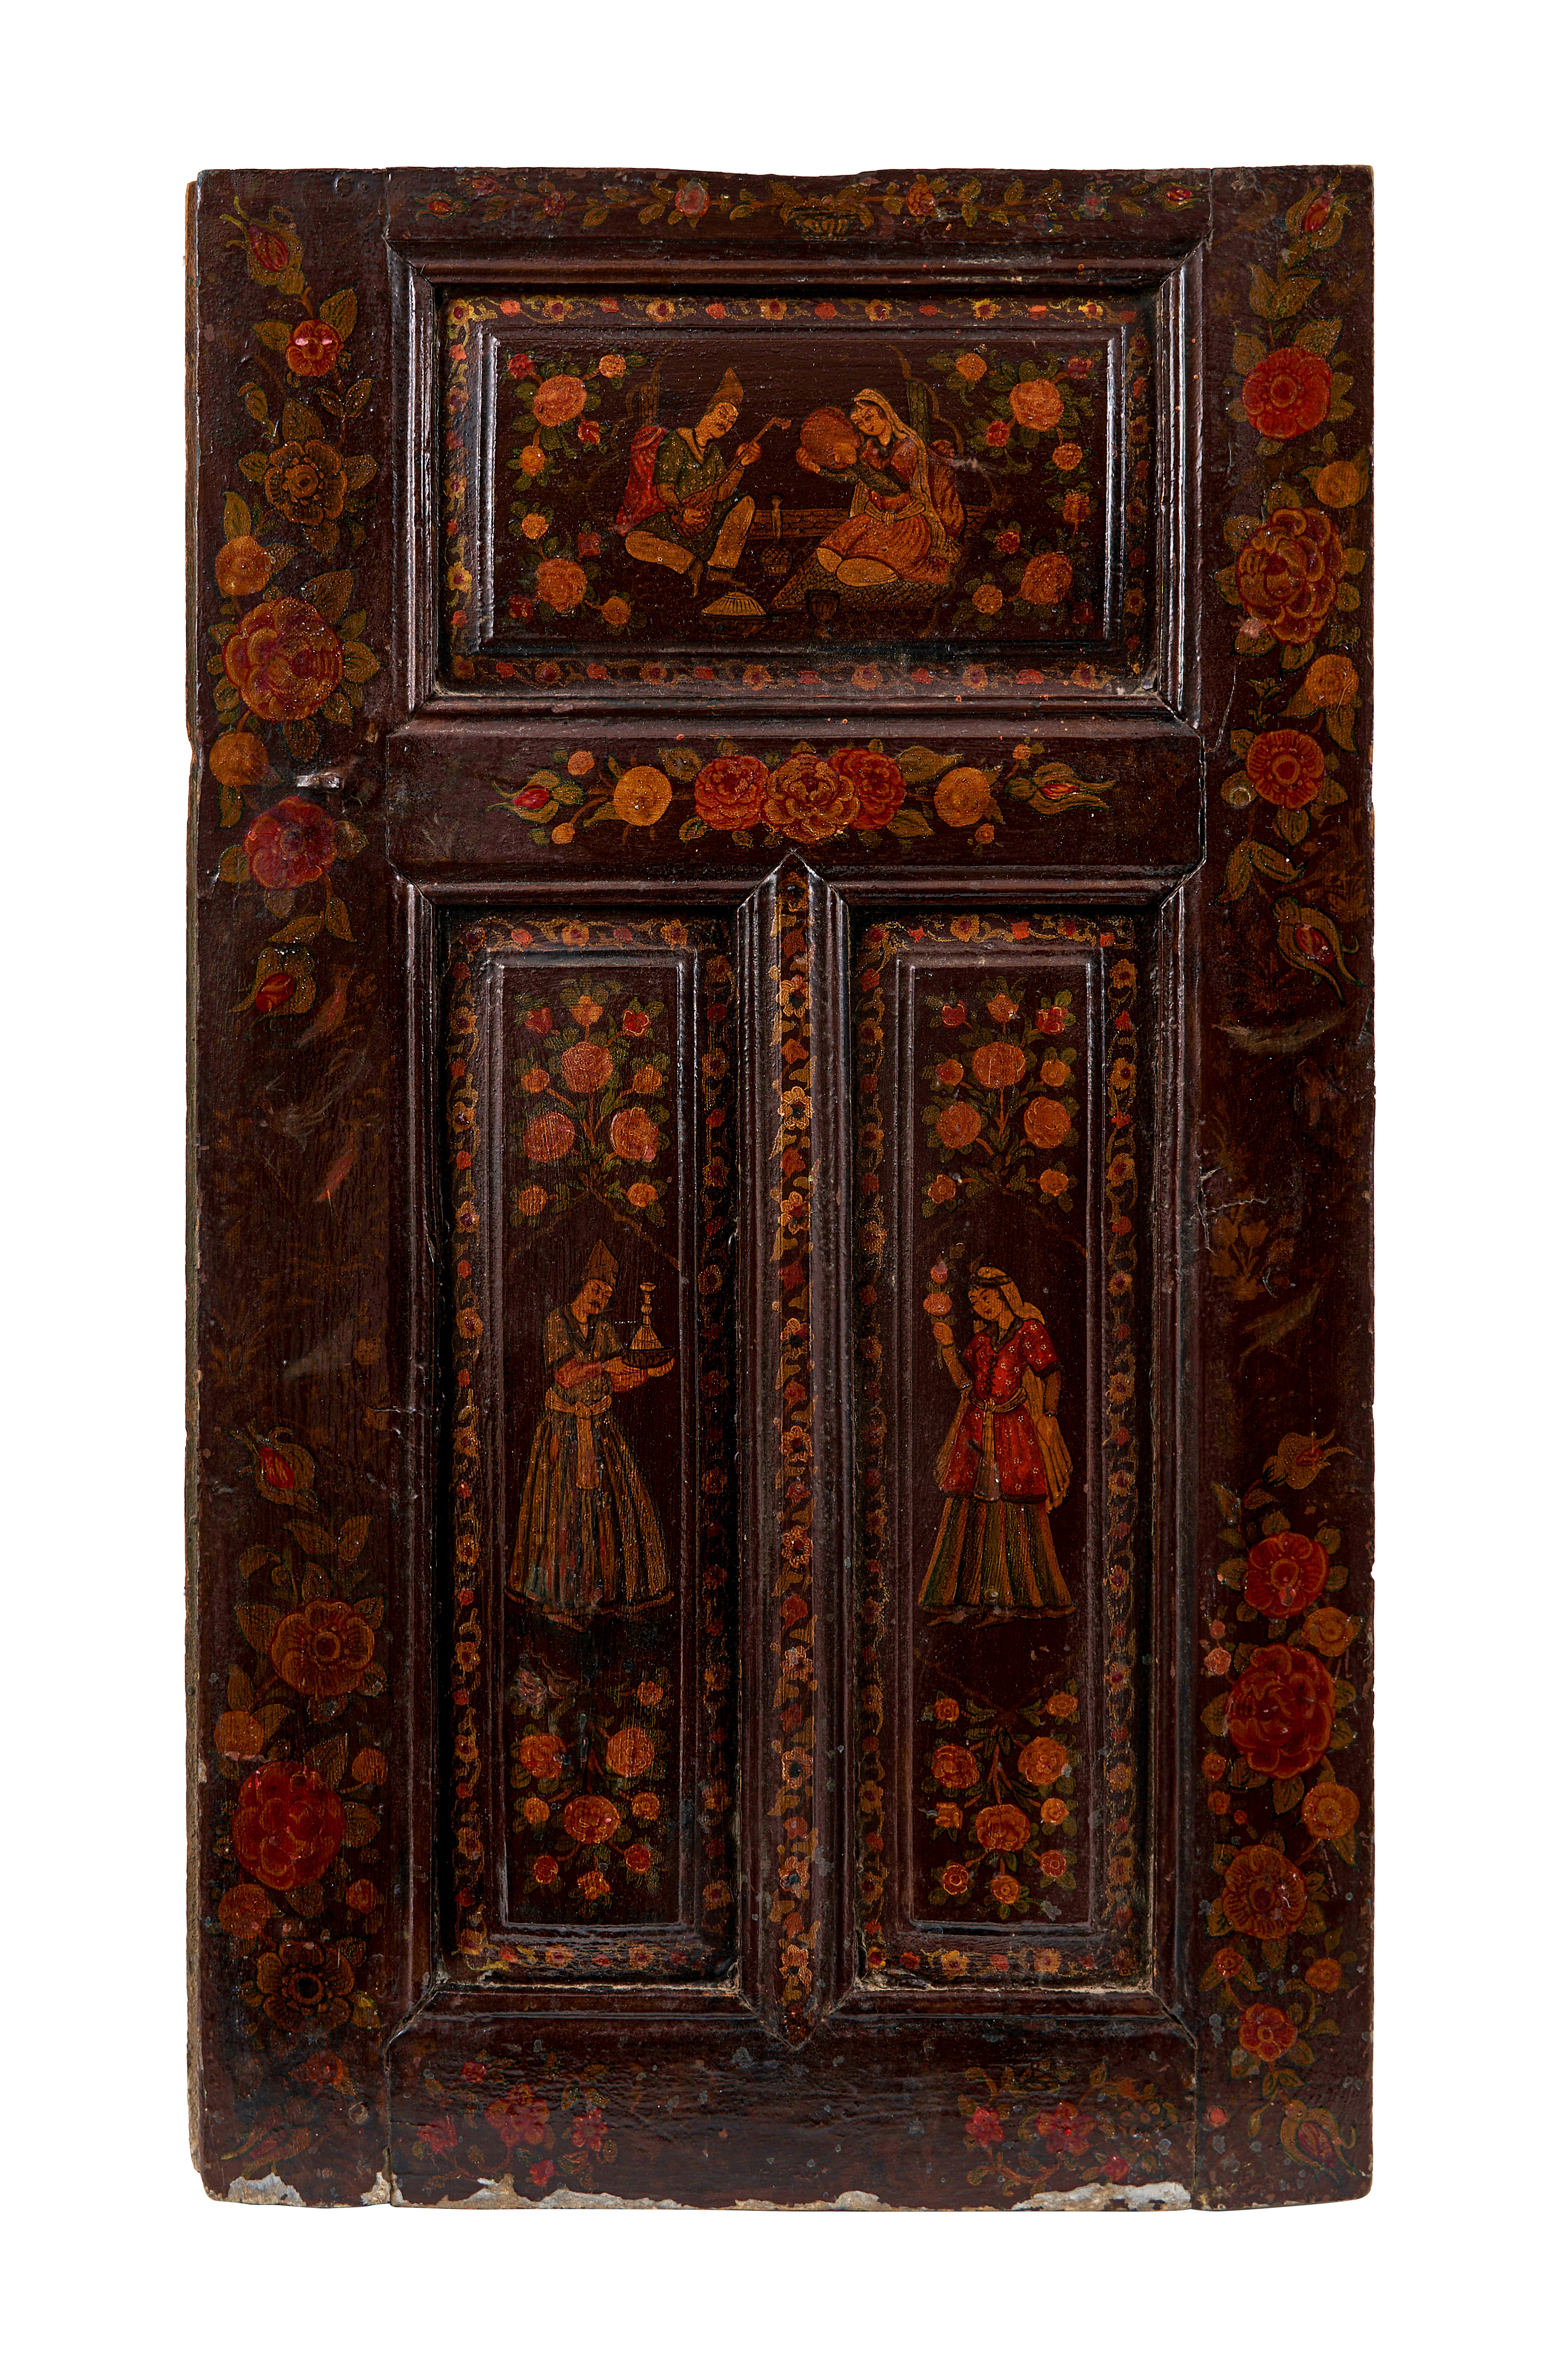 A PAIR OF QAJAR PAINTED AND GESSO APPLIED WOODEN DOORS, 19TH CENTURY, PERSIA - Image 3 of 4